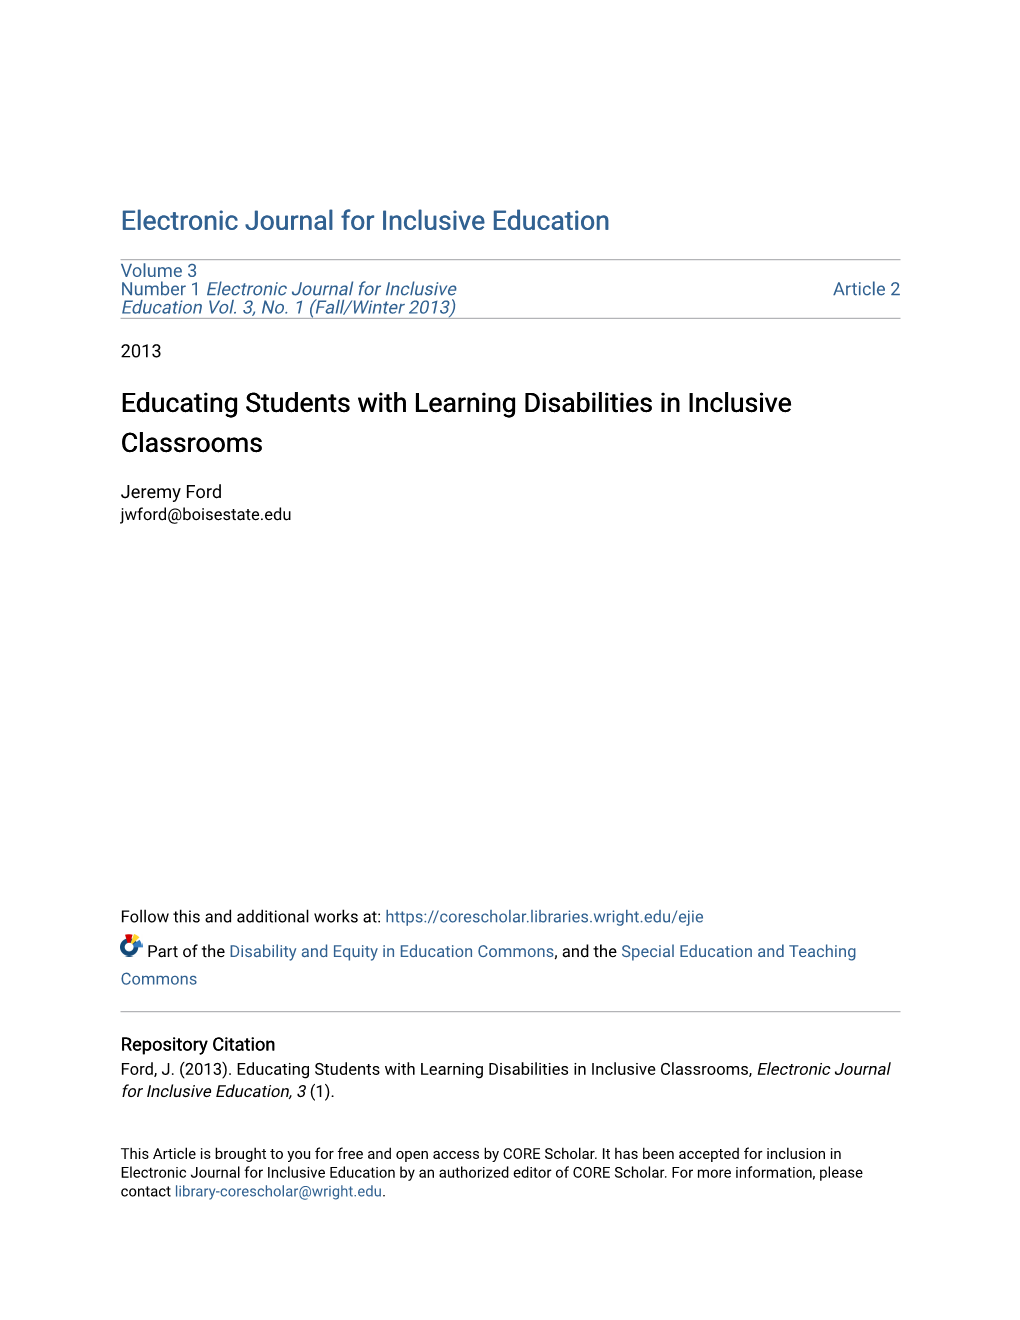 Educating Students with Learning Disabilities in Inclusive Classrooms